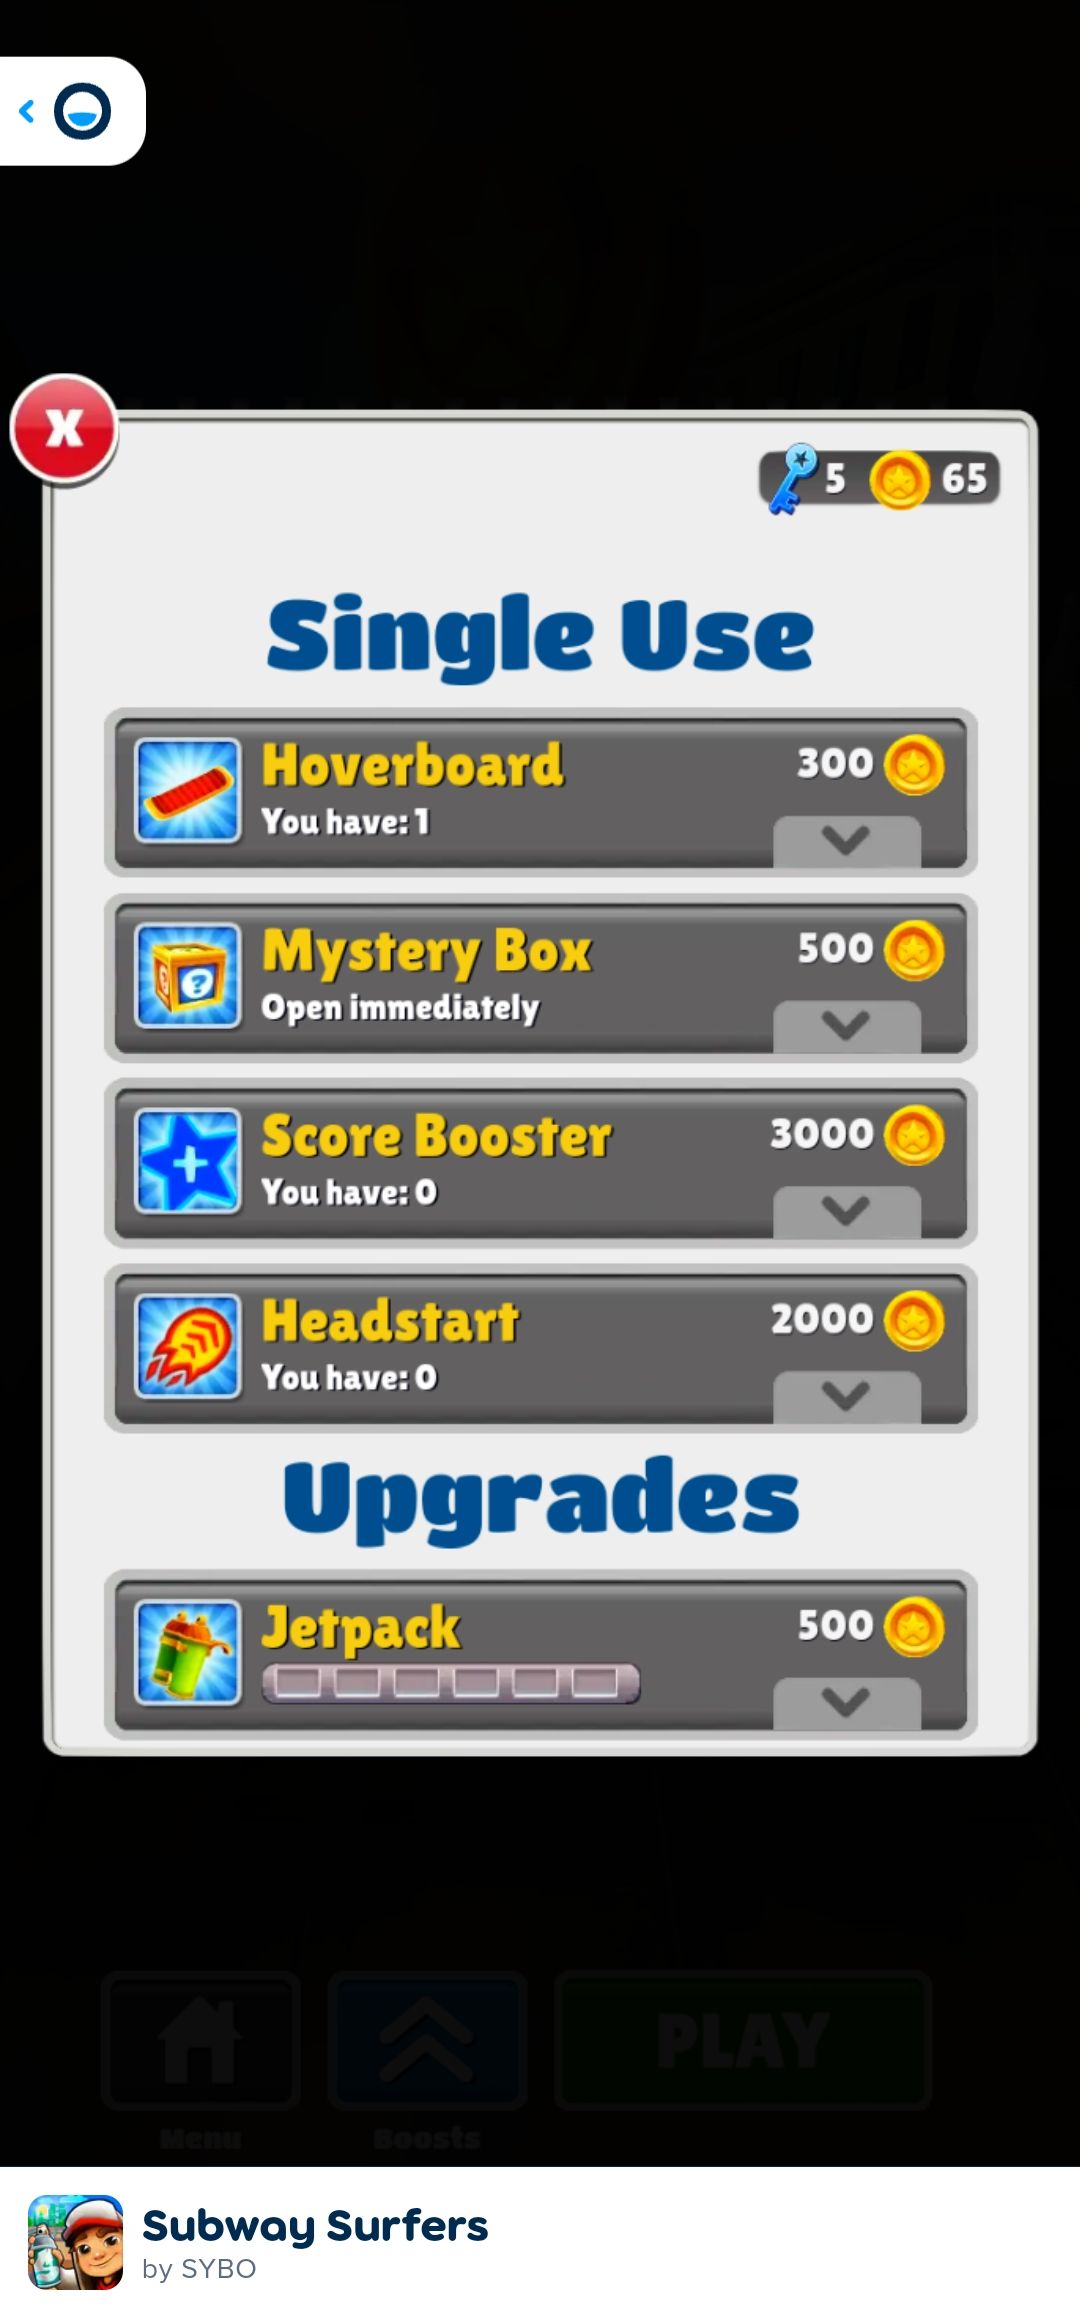 Screenshot of Subway Surfers web-based mobile boosts store in mobile browser.